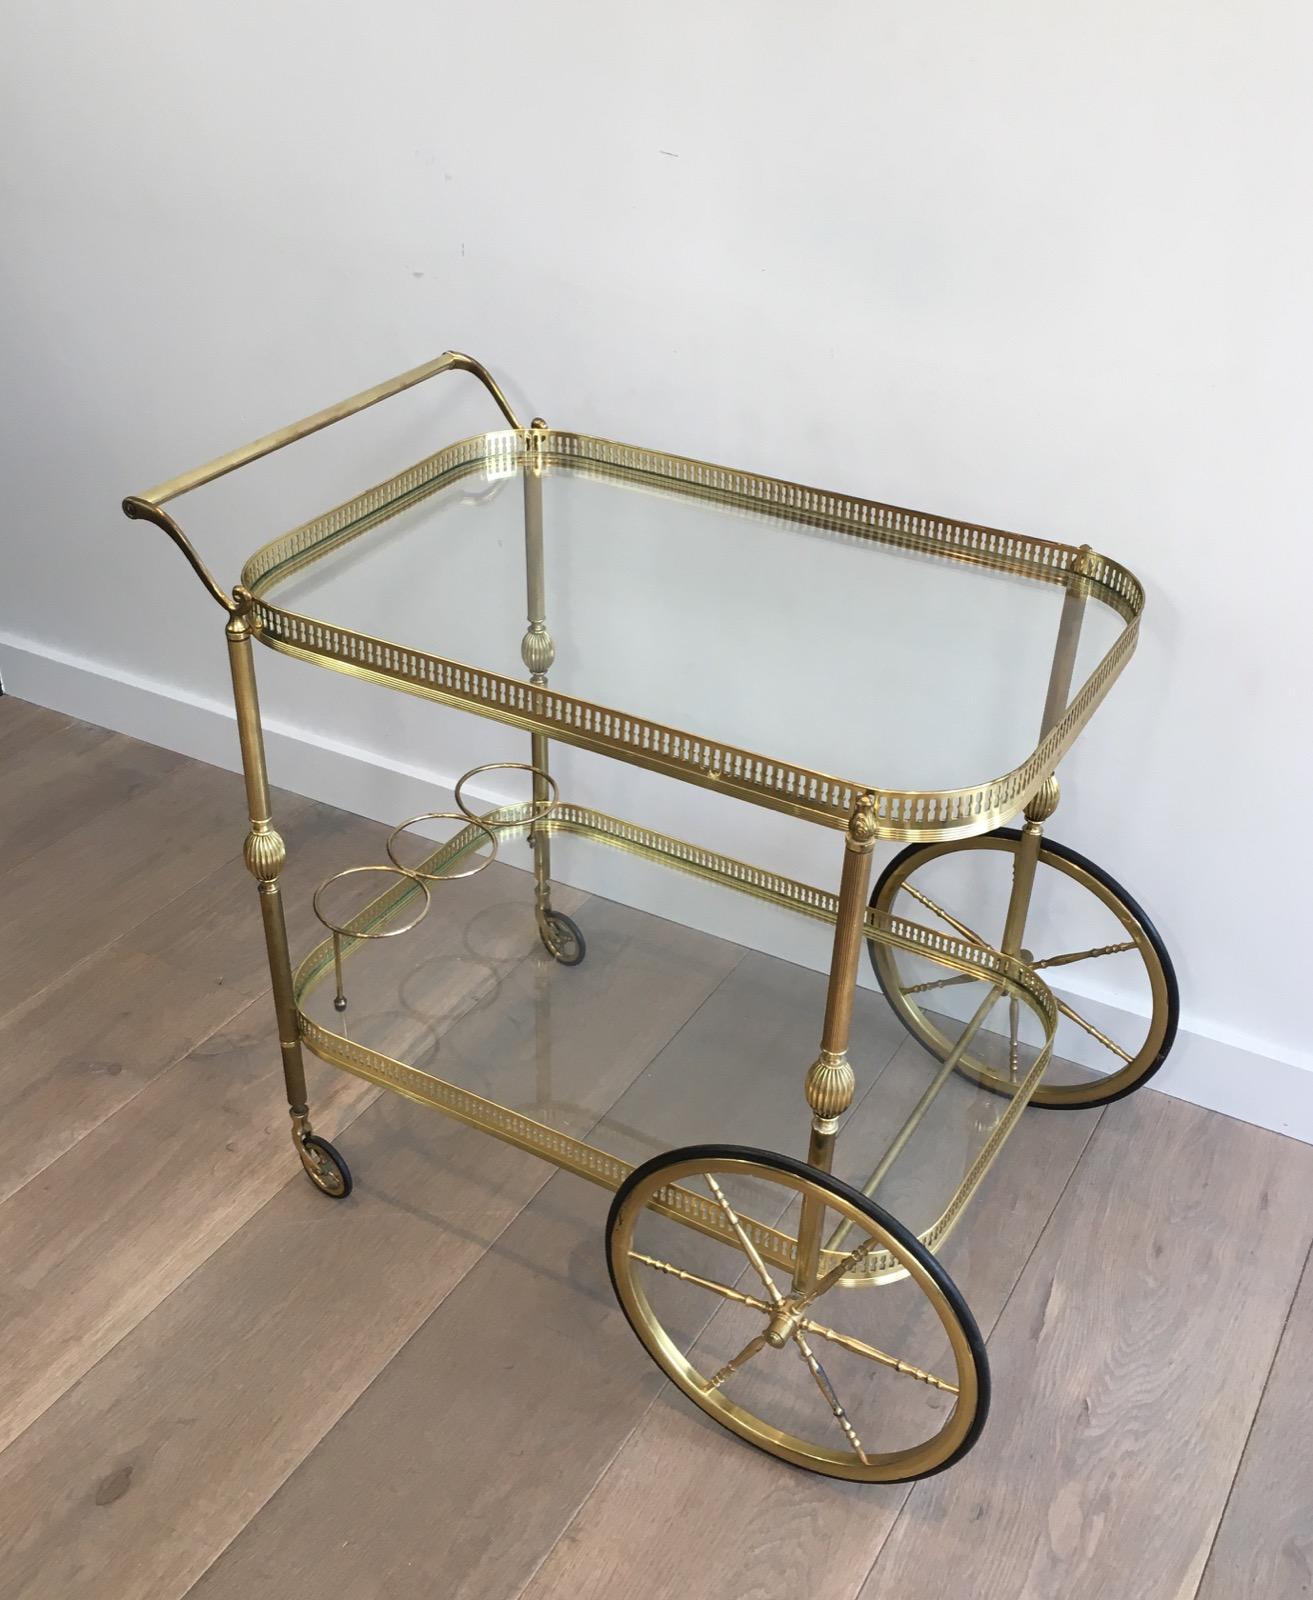 This elegant neoclassical bar cart is all made of brass with two glass shelves. This drinks trolley has nice details and its large wheels on front are very decorative. There is a three bottles holder on the bottom part. This is a French work, in the